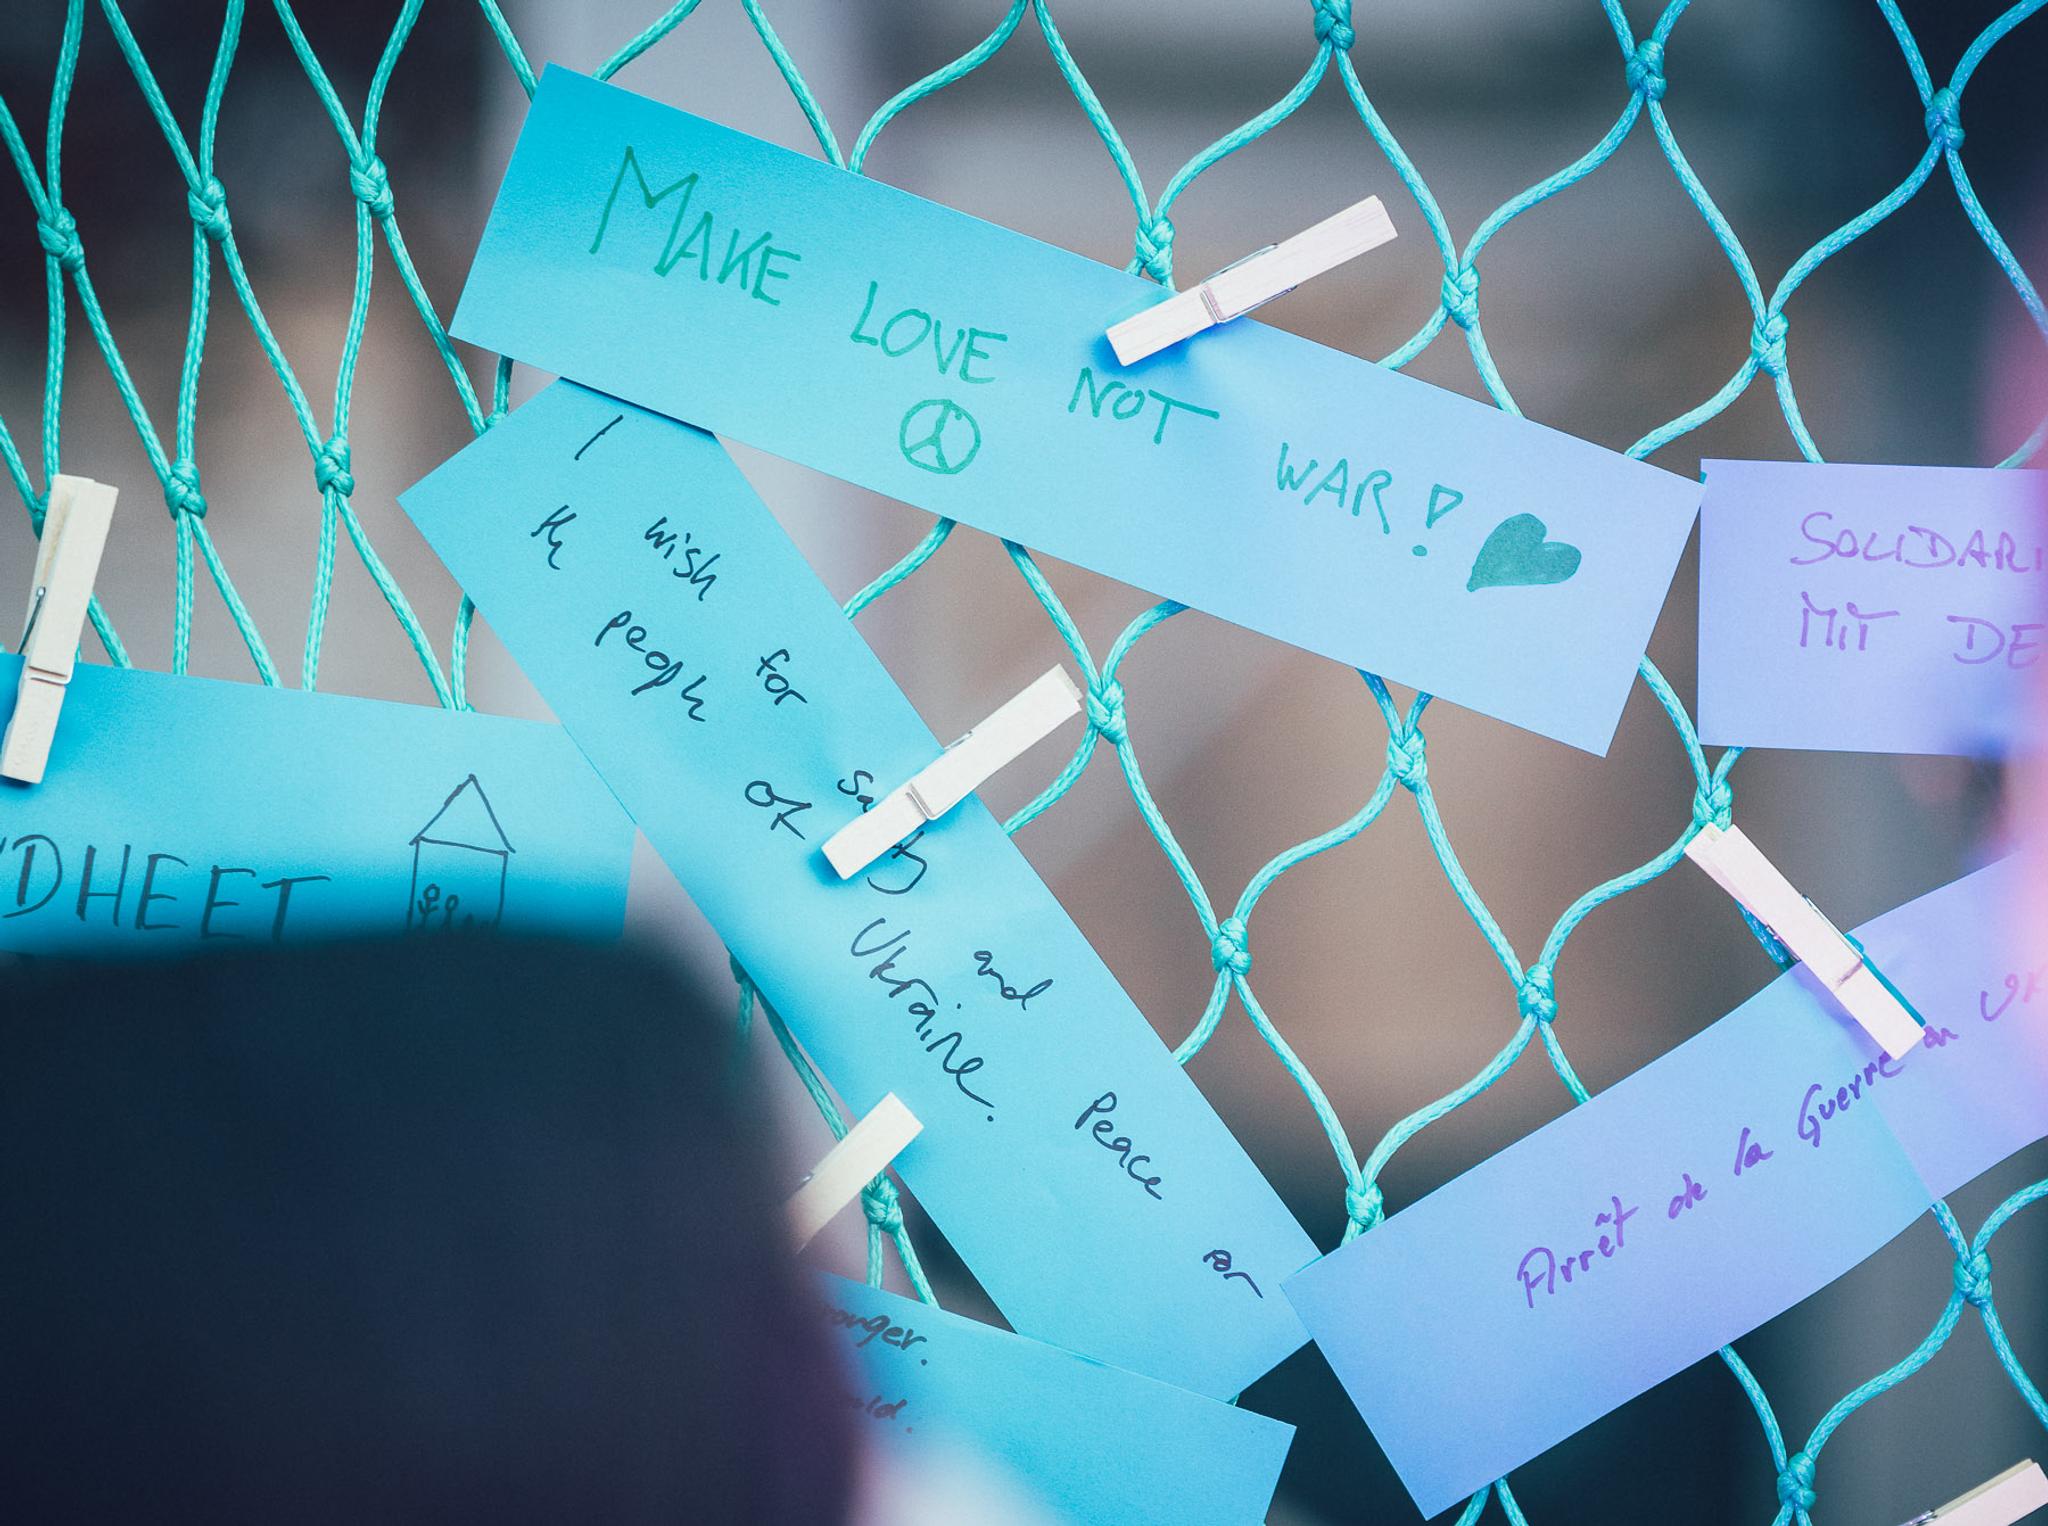 Handwritten notes on a fishnet: "make love not war," and "I wish for safety and peace for the people of Ukraine."